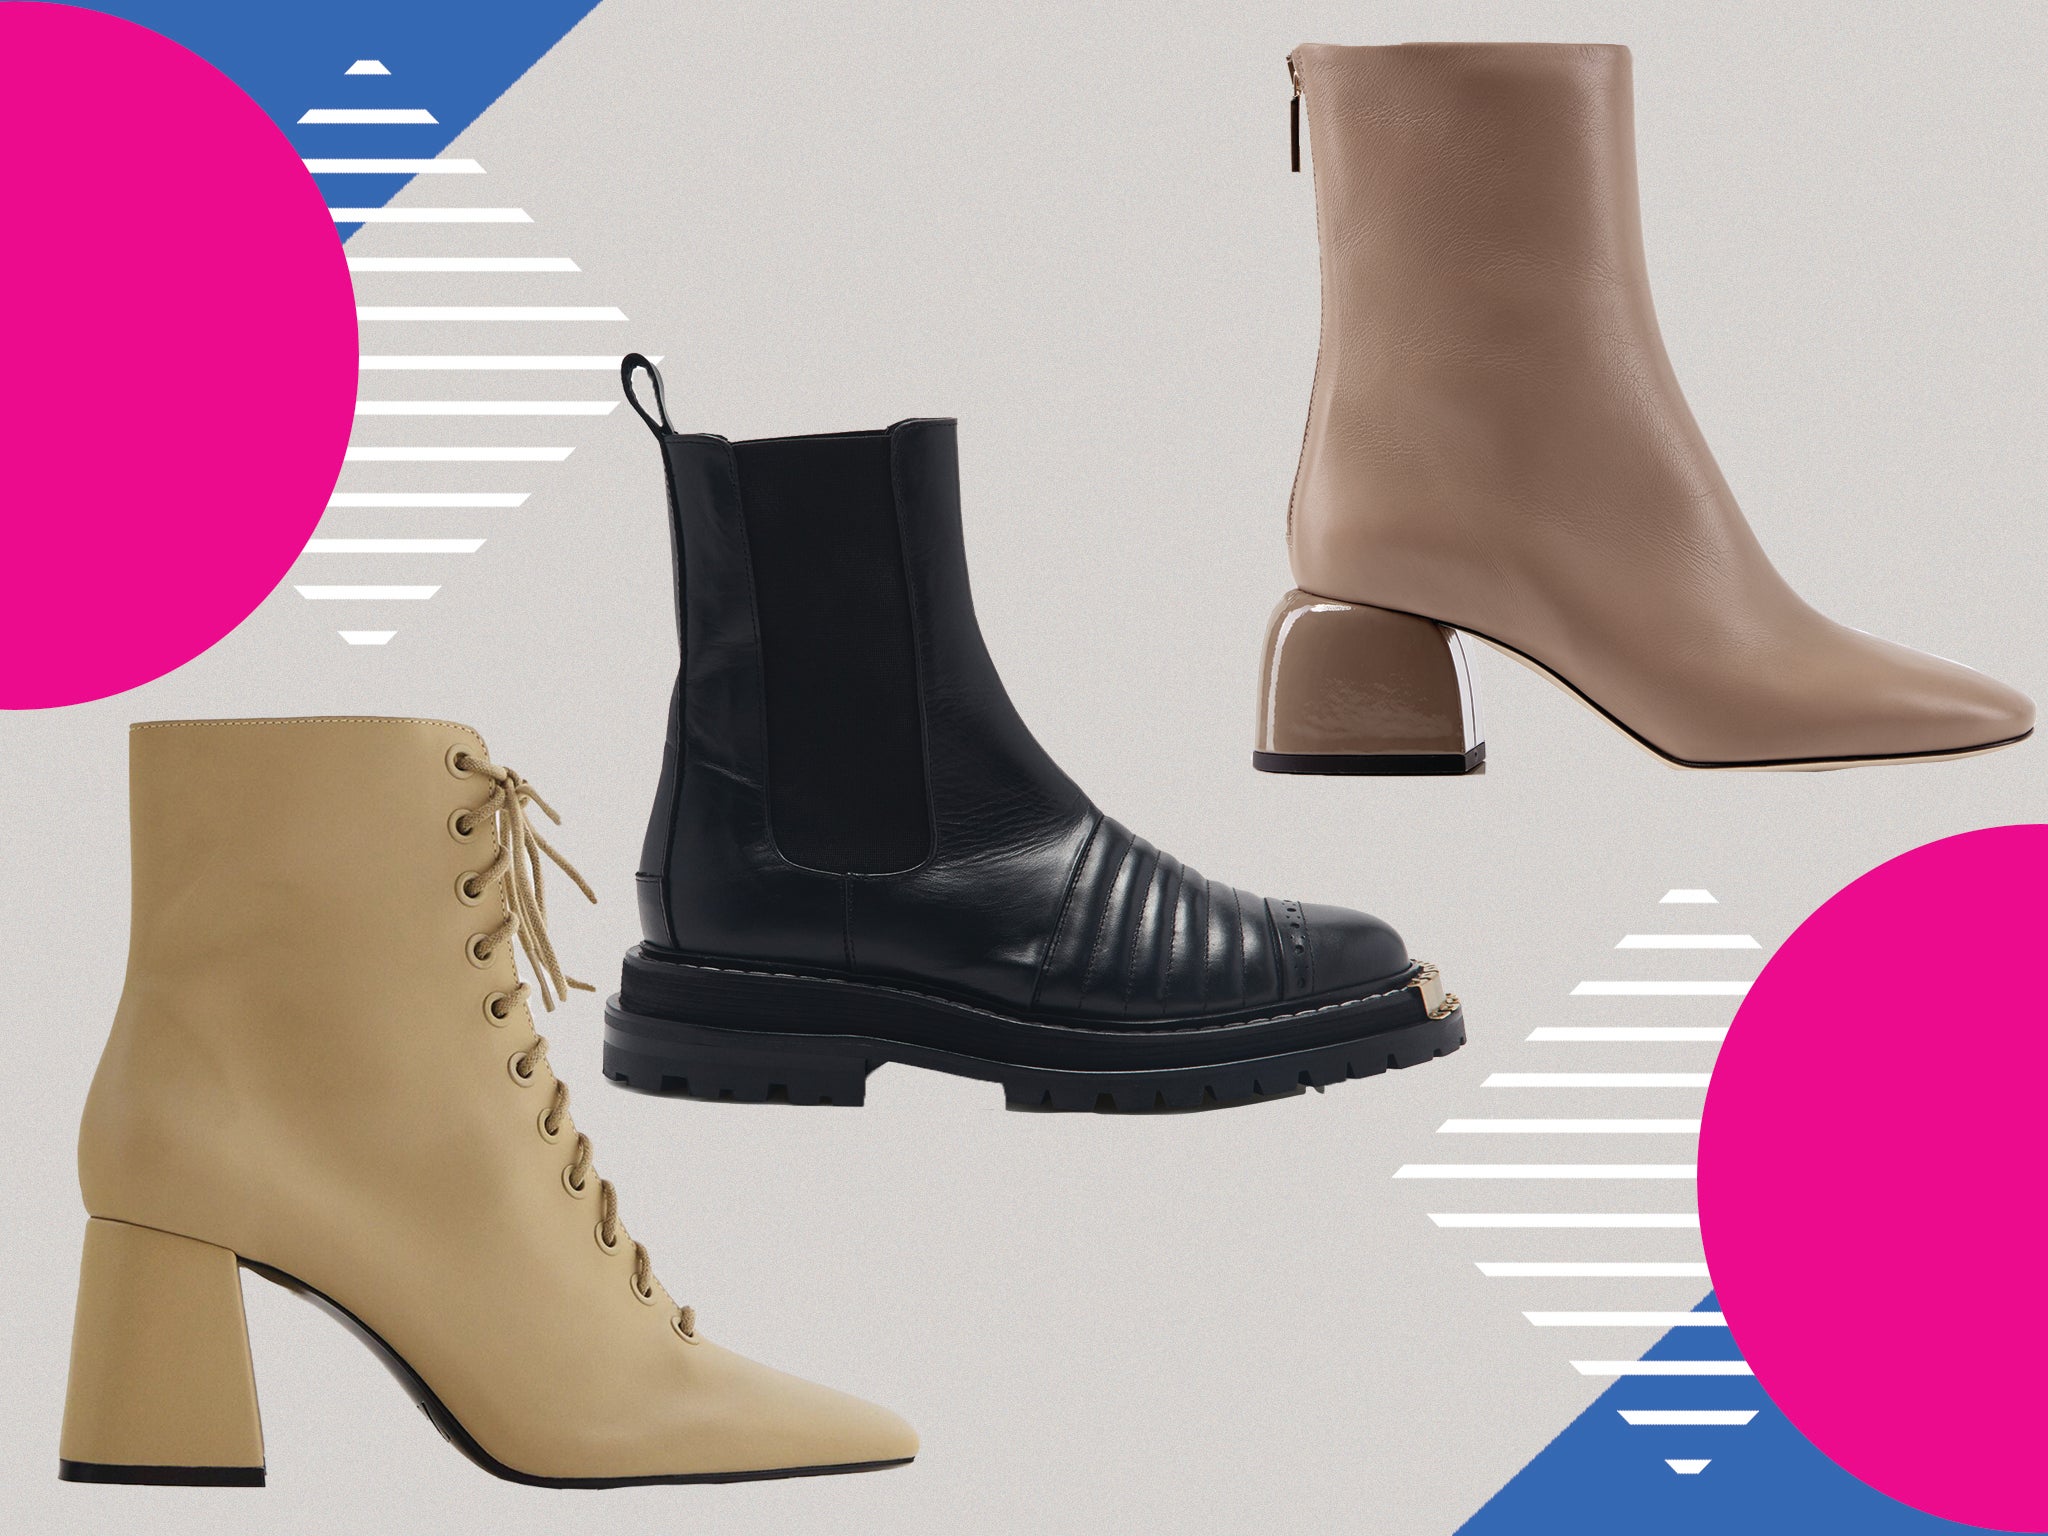 Best women's ankle boots 2020: Lace-up 